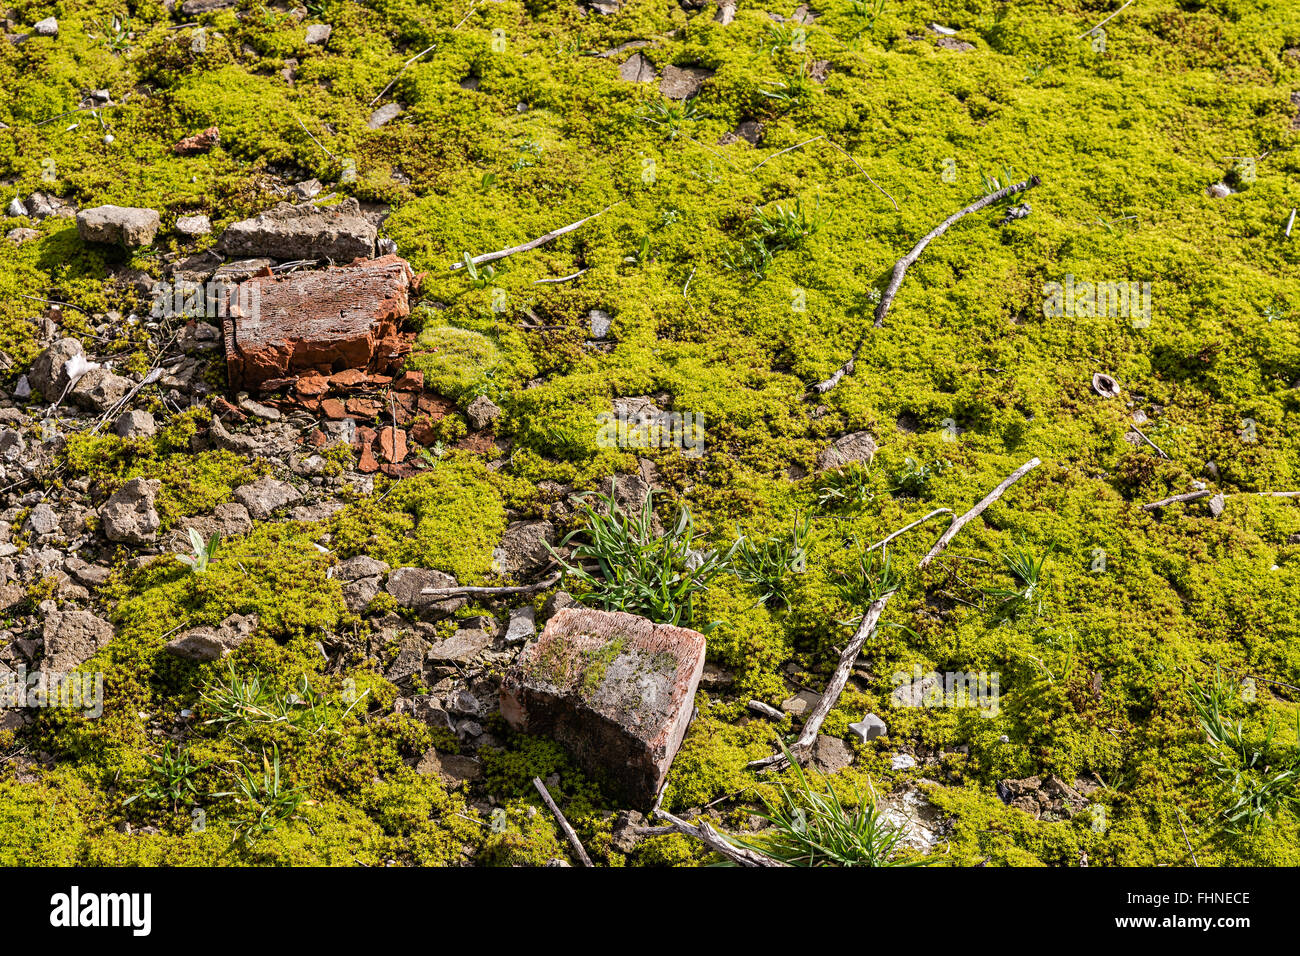 Rubble of old buildings as the environmental burden of nature Stock Photo